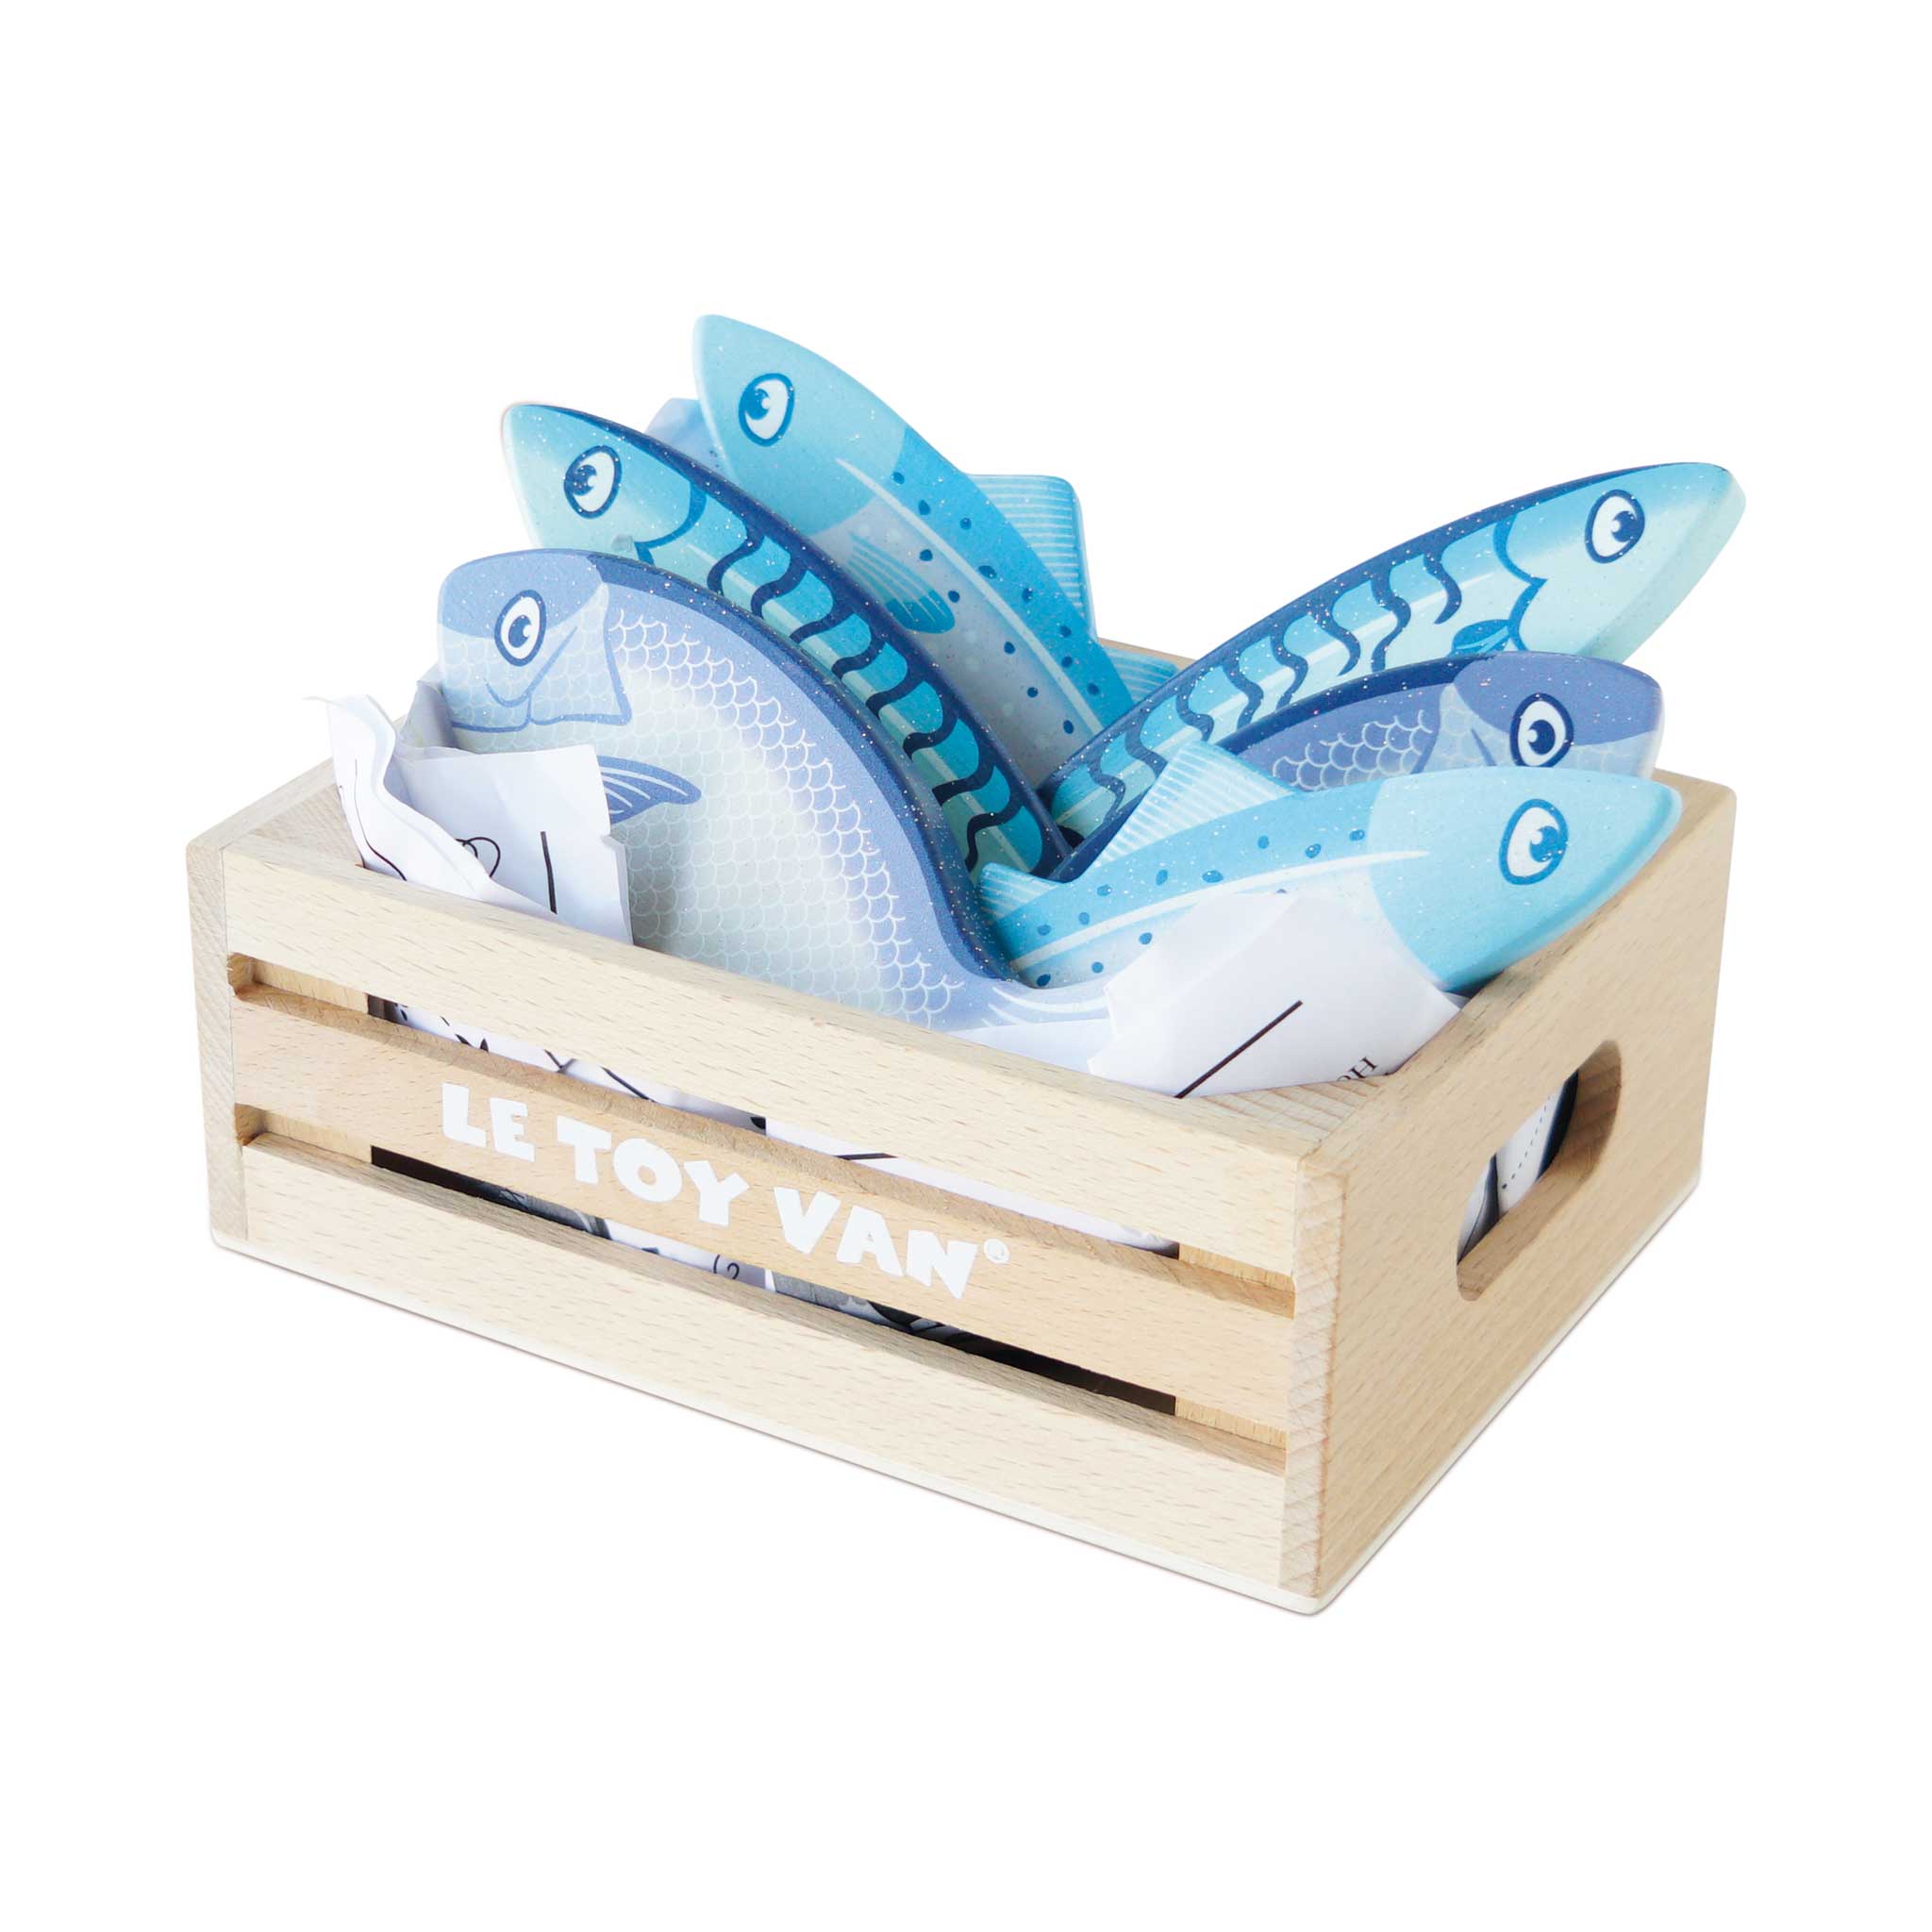 Market Fish Wooden Play Food Crate